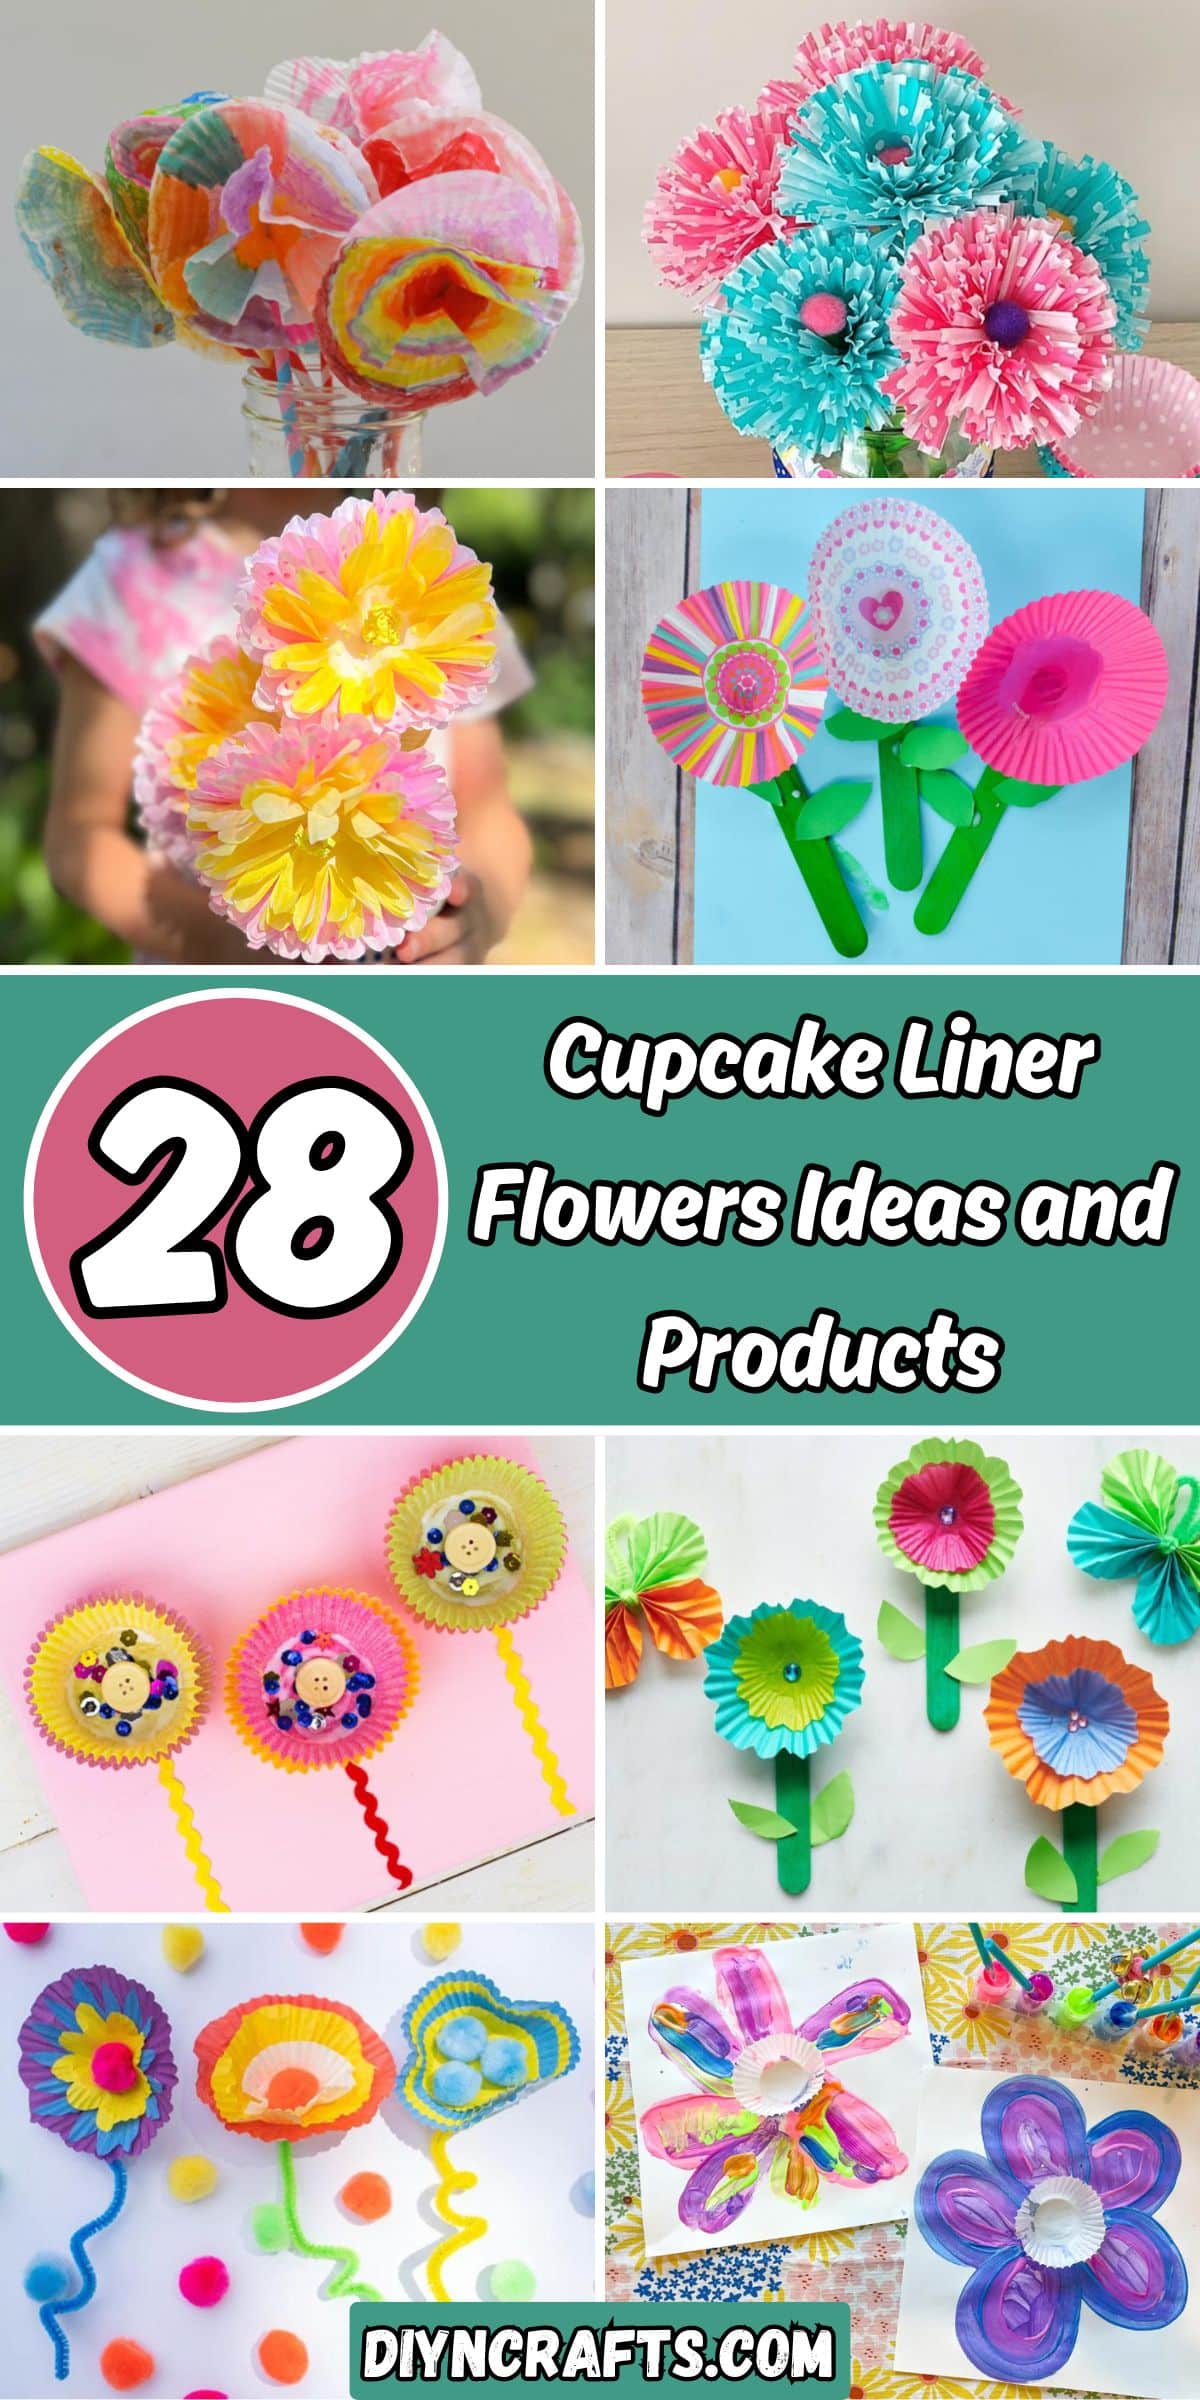 28 Cupcake Liner Flowers Ideas and Products collage.